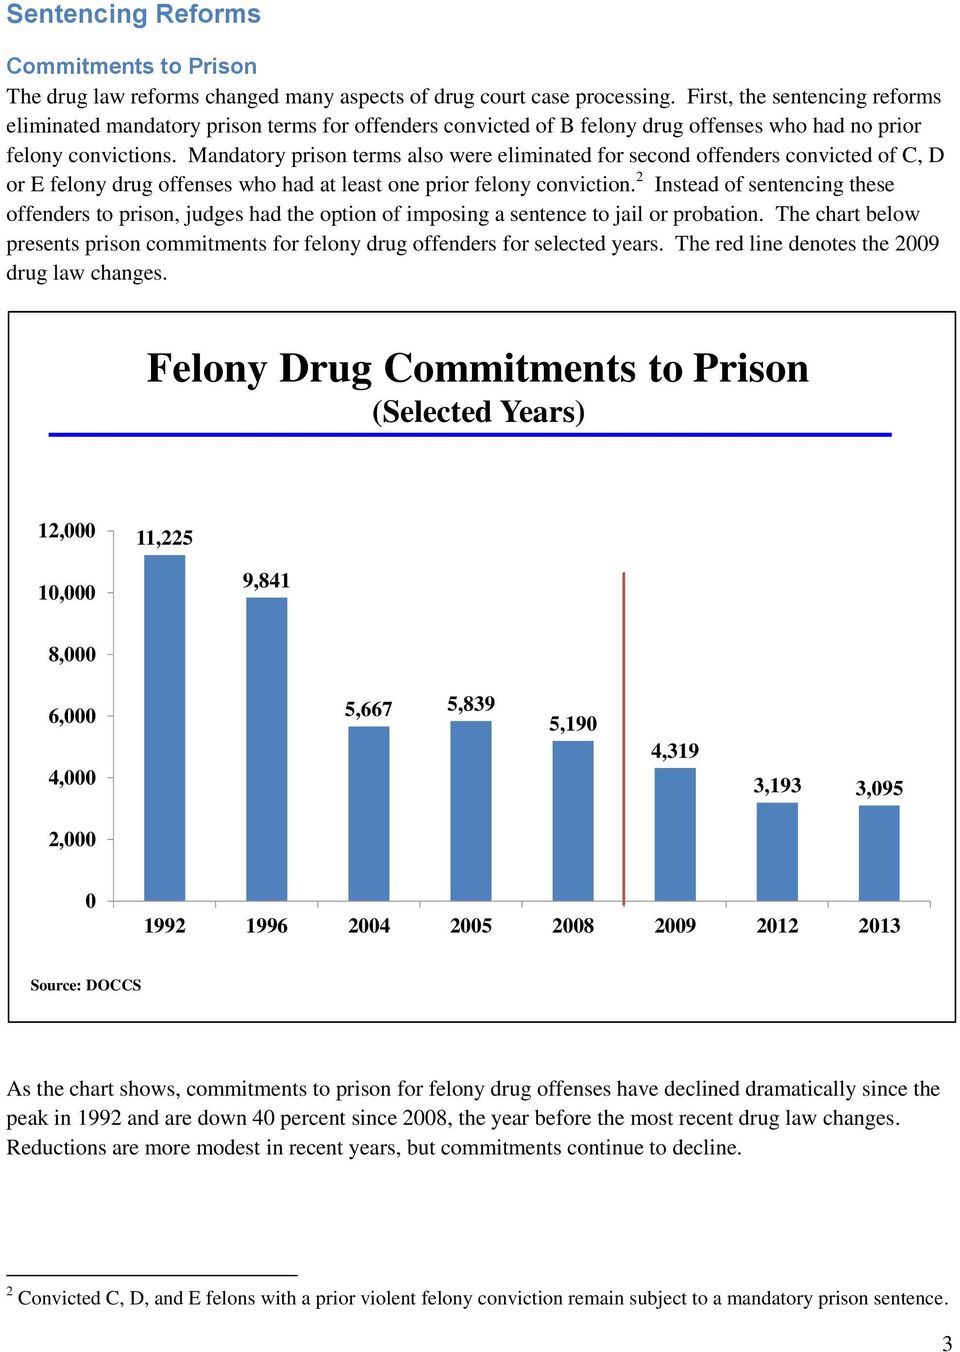 Mandatory prison terms also were eliminated for second offenders convicted of C, D or E felony drug offenses who had at least one prior felony conviction.